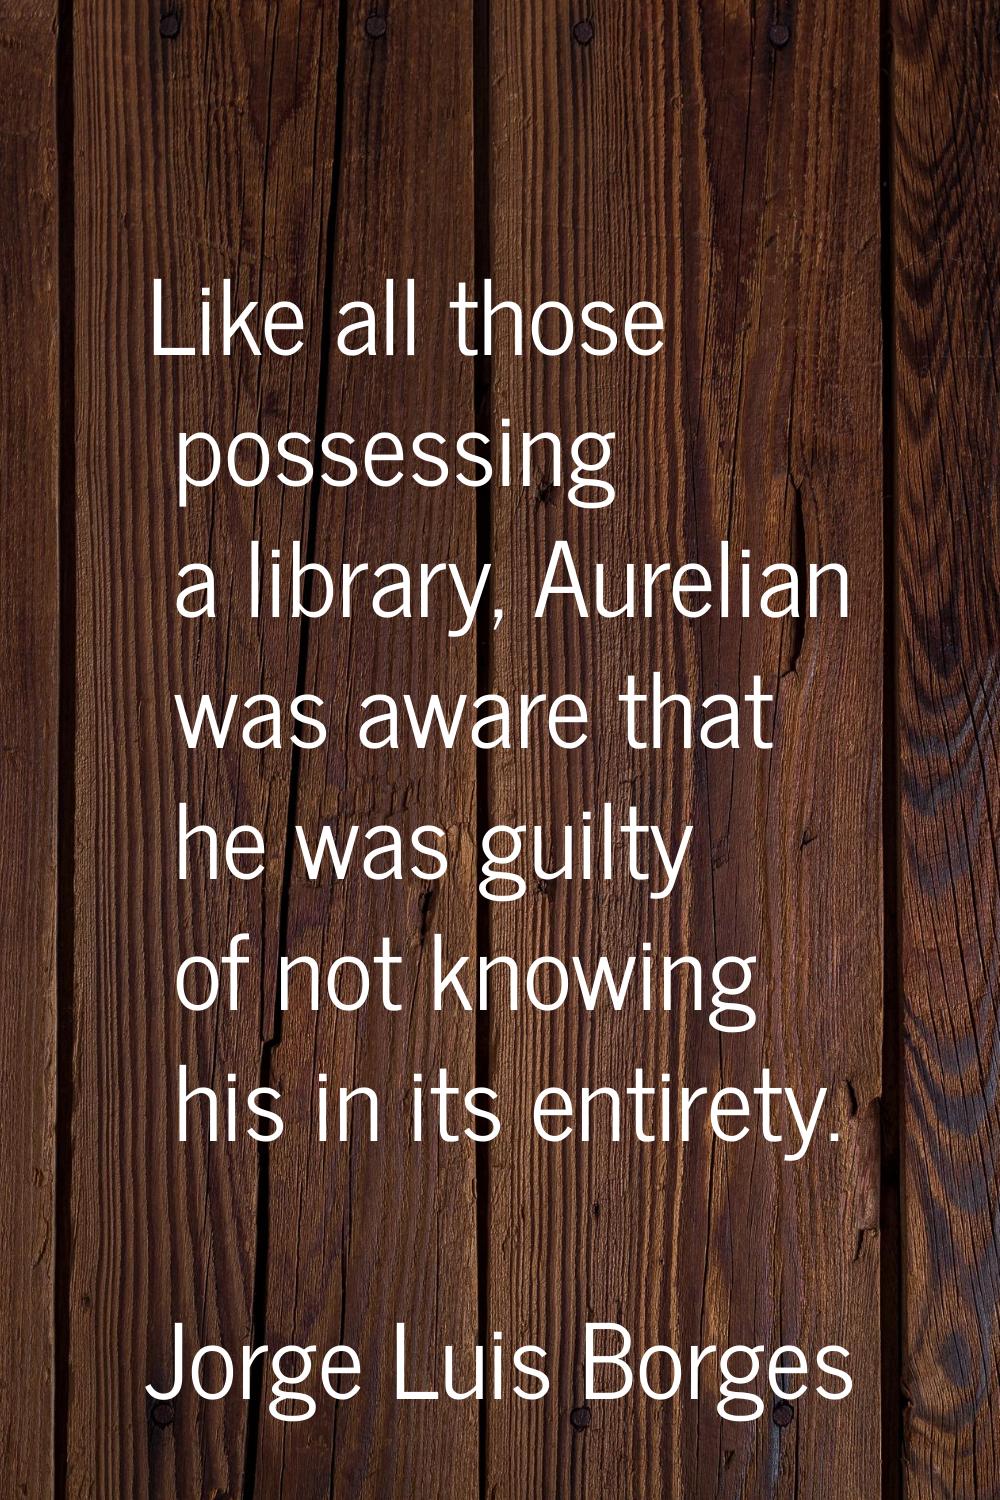 Like all those possessing a library, Aurelian was aware that he was guilty of not knowing his in it